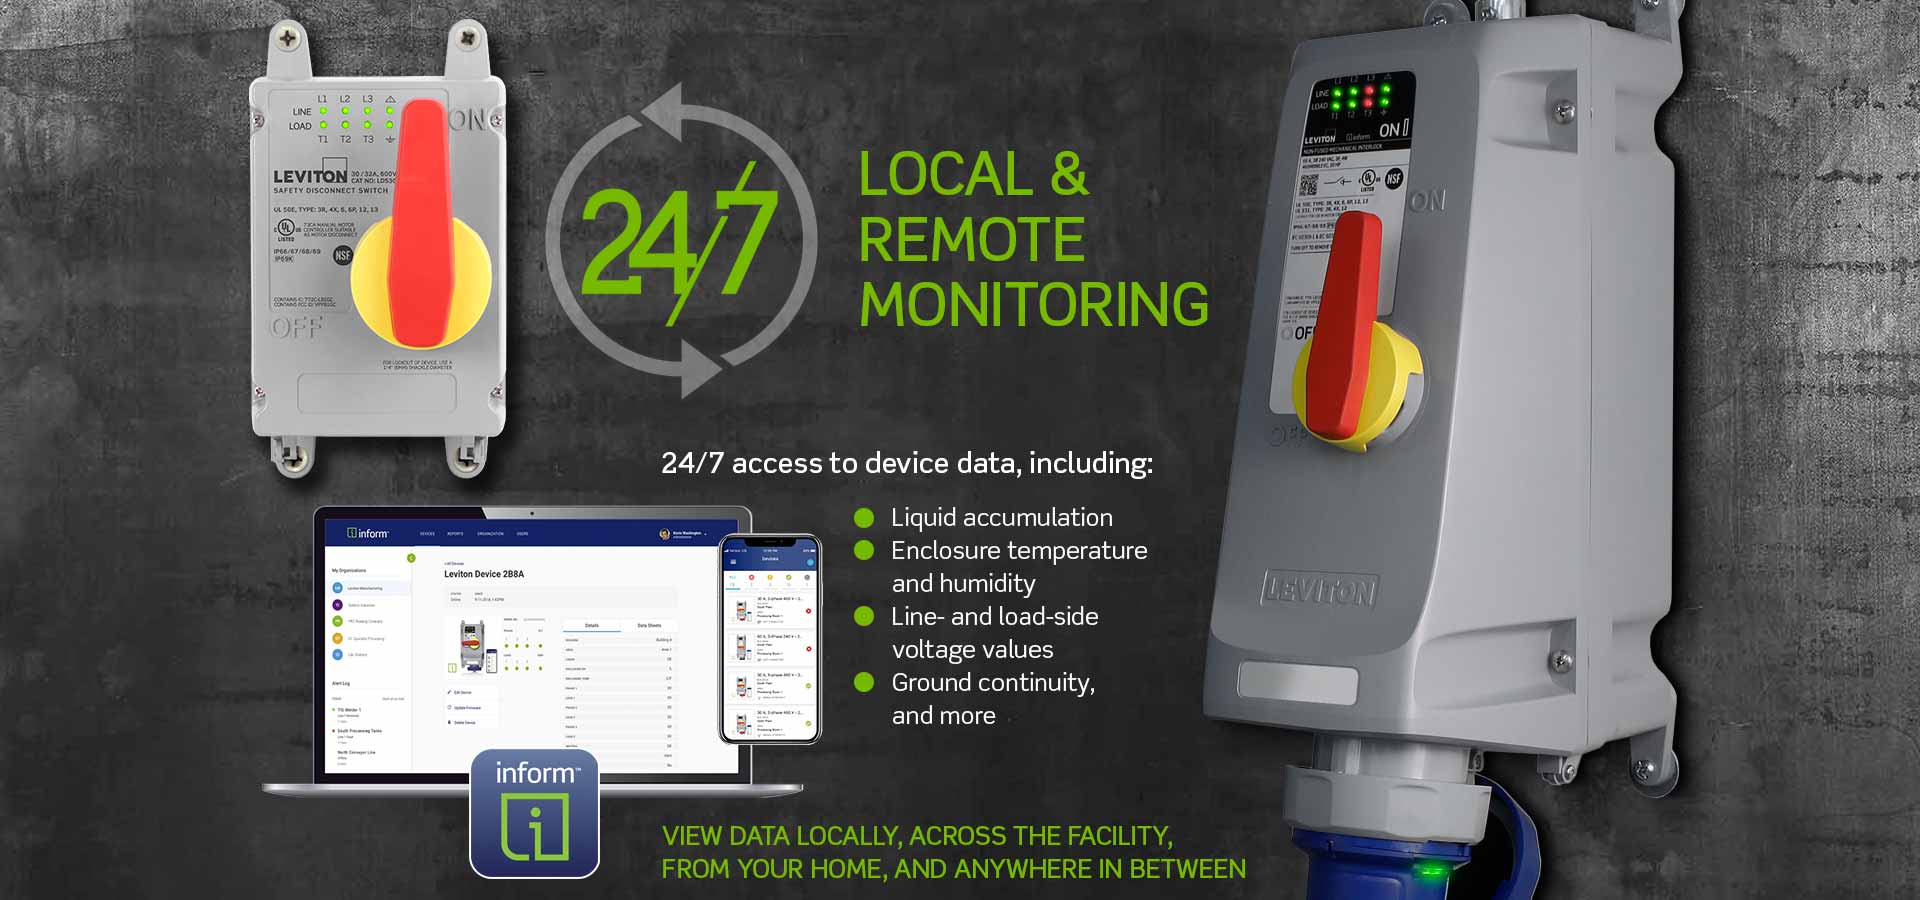 24/7 Local and Remote Monitoring - 24/7 access to device data including liquid accumulation, enclosure temperature and humidity, line and load side voltage values, ground continuity and more. View data locally across the facility from your home and anywhere in between